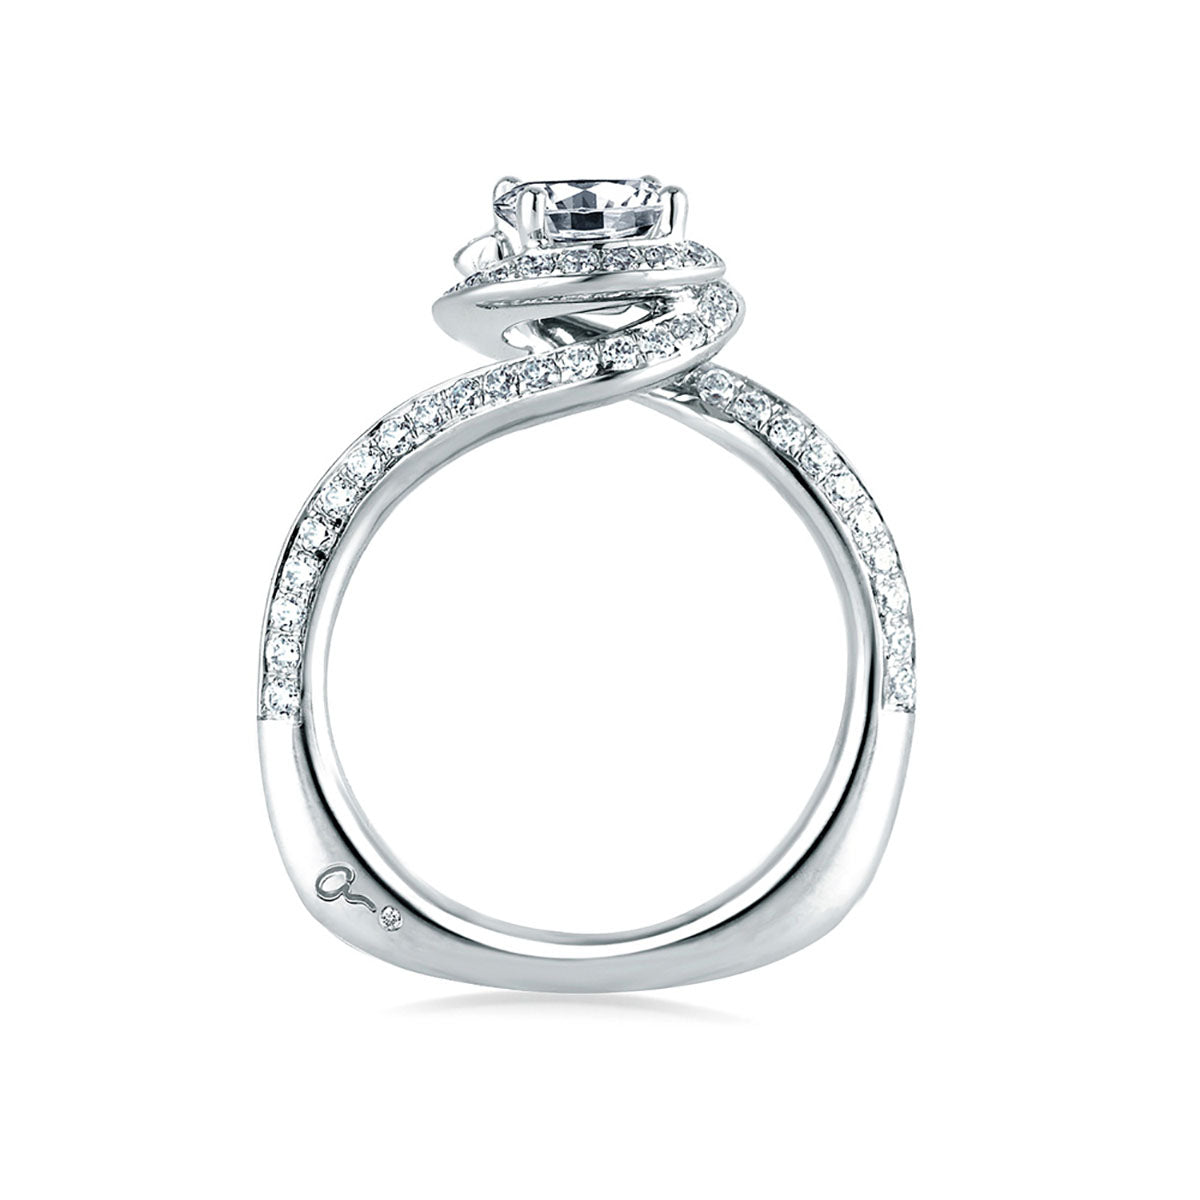 A.Jaffe Signature Spiral Halo Diamond Engagement Ring MES322/125